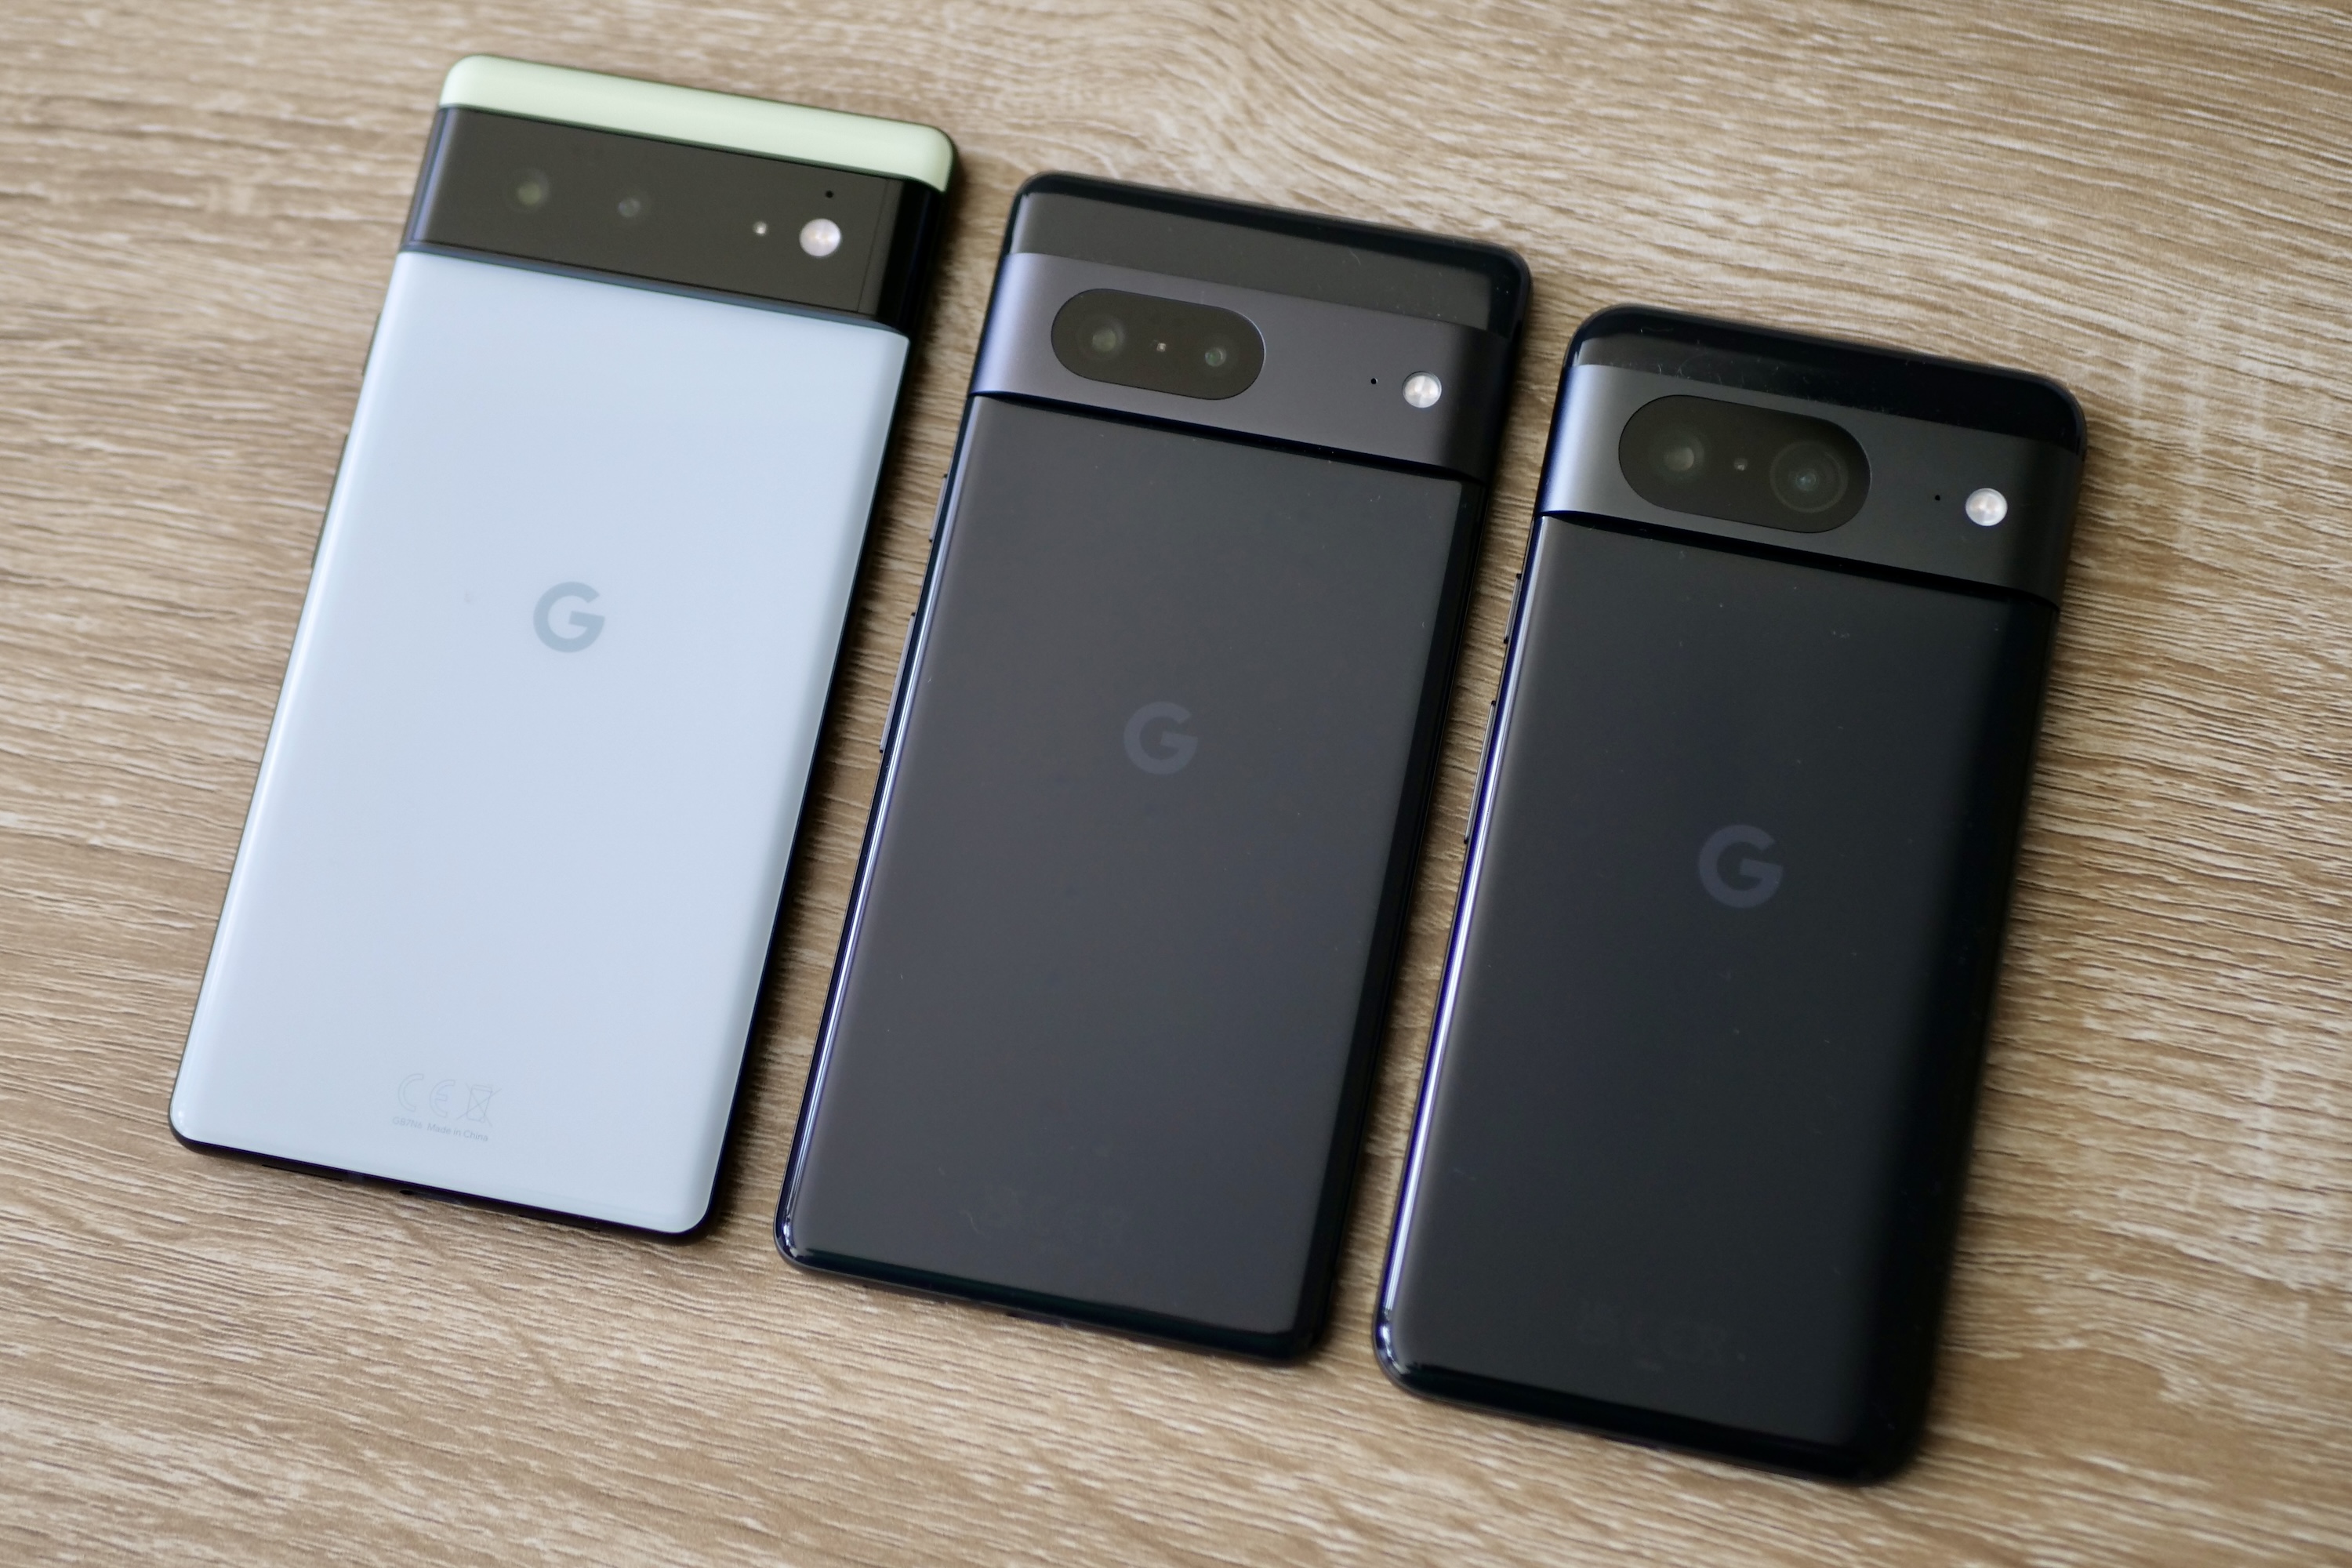 Pixel 6 long-term review: All the 'Pros' with few of the cons - 9to5Google